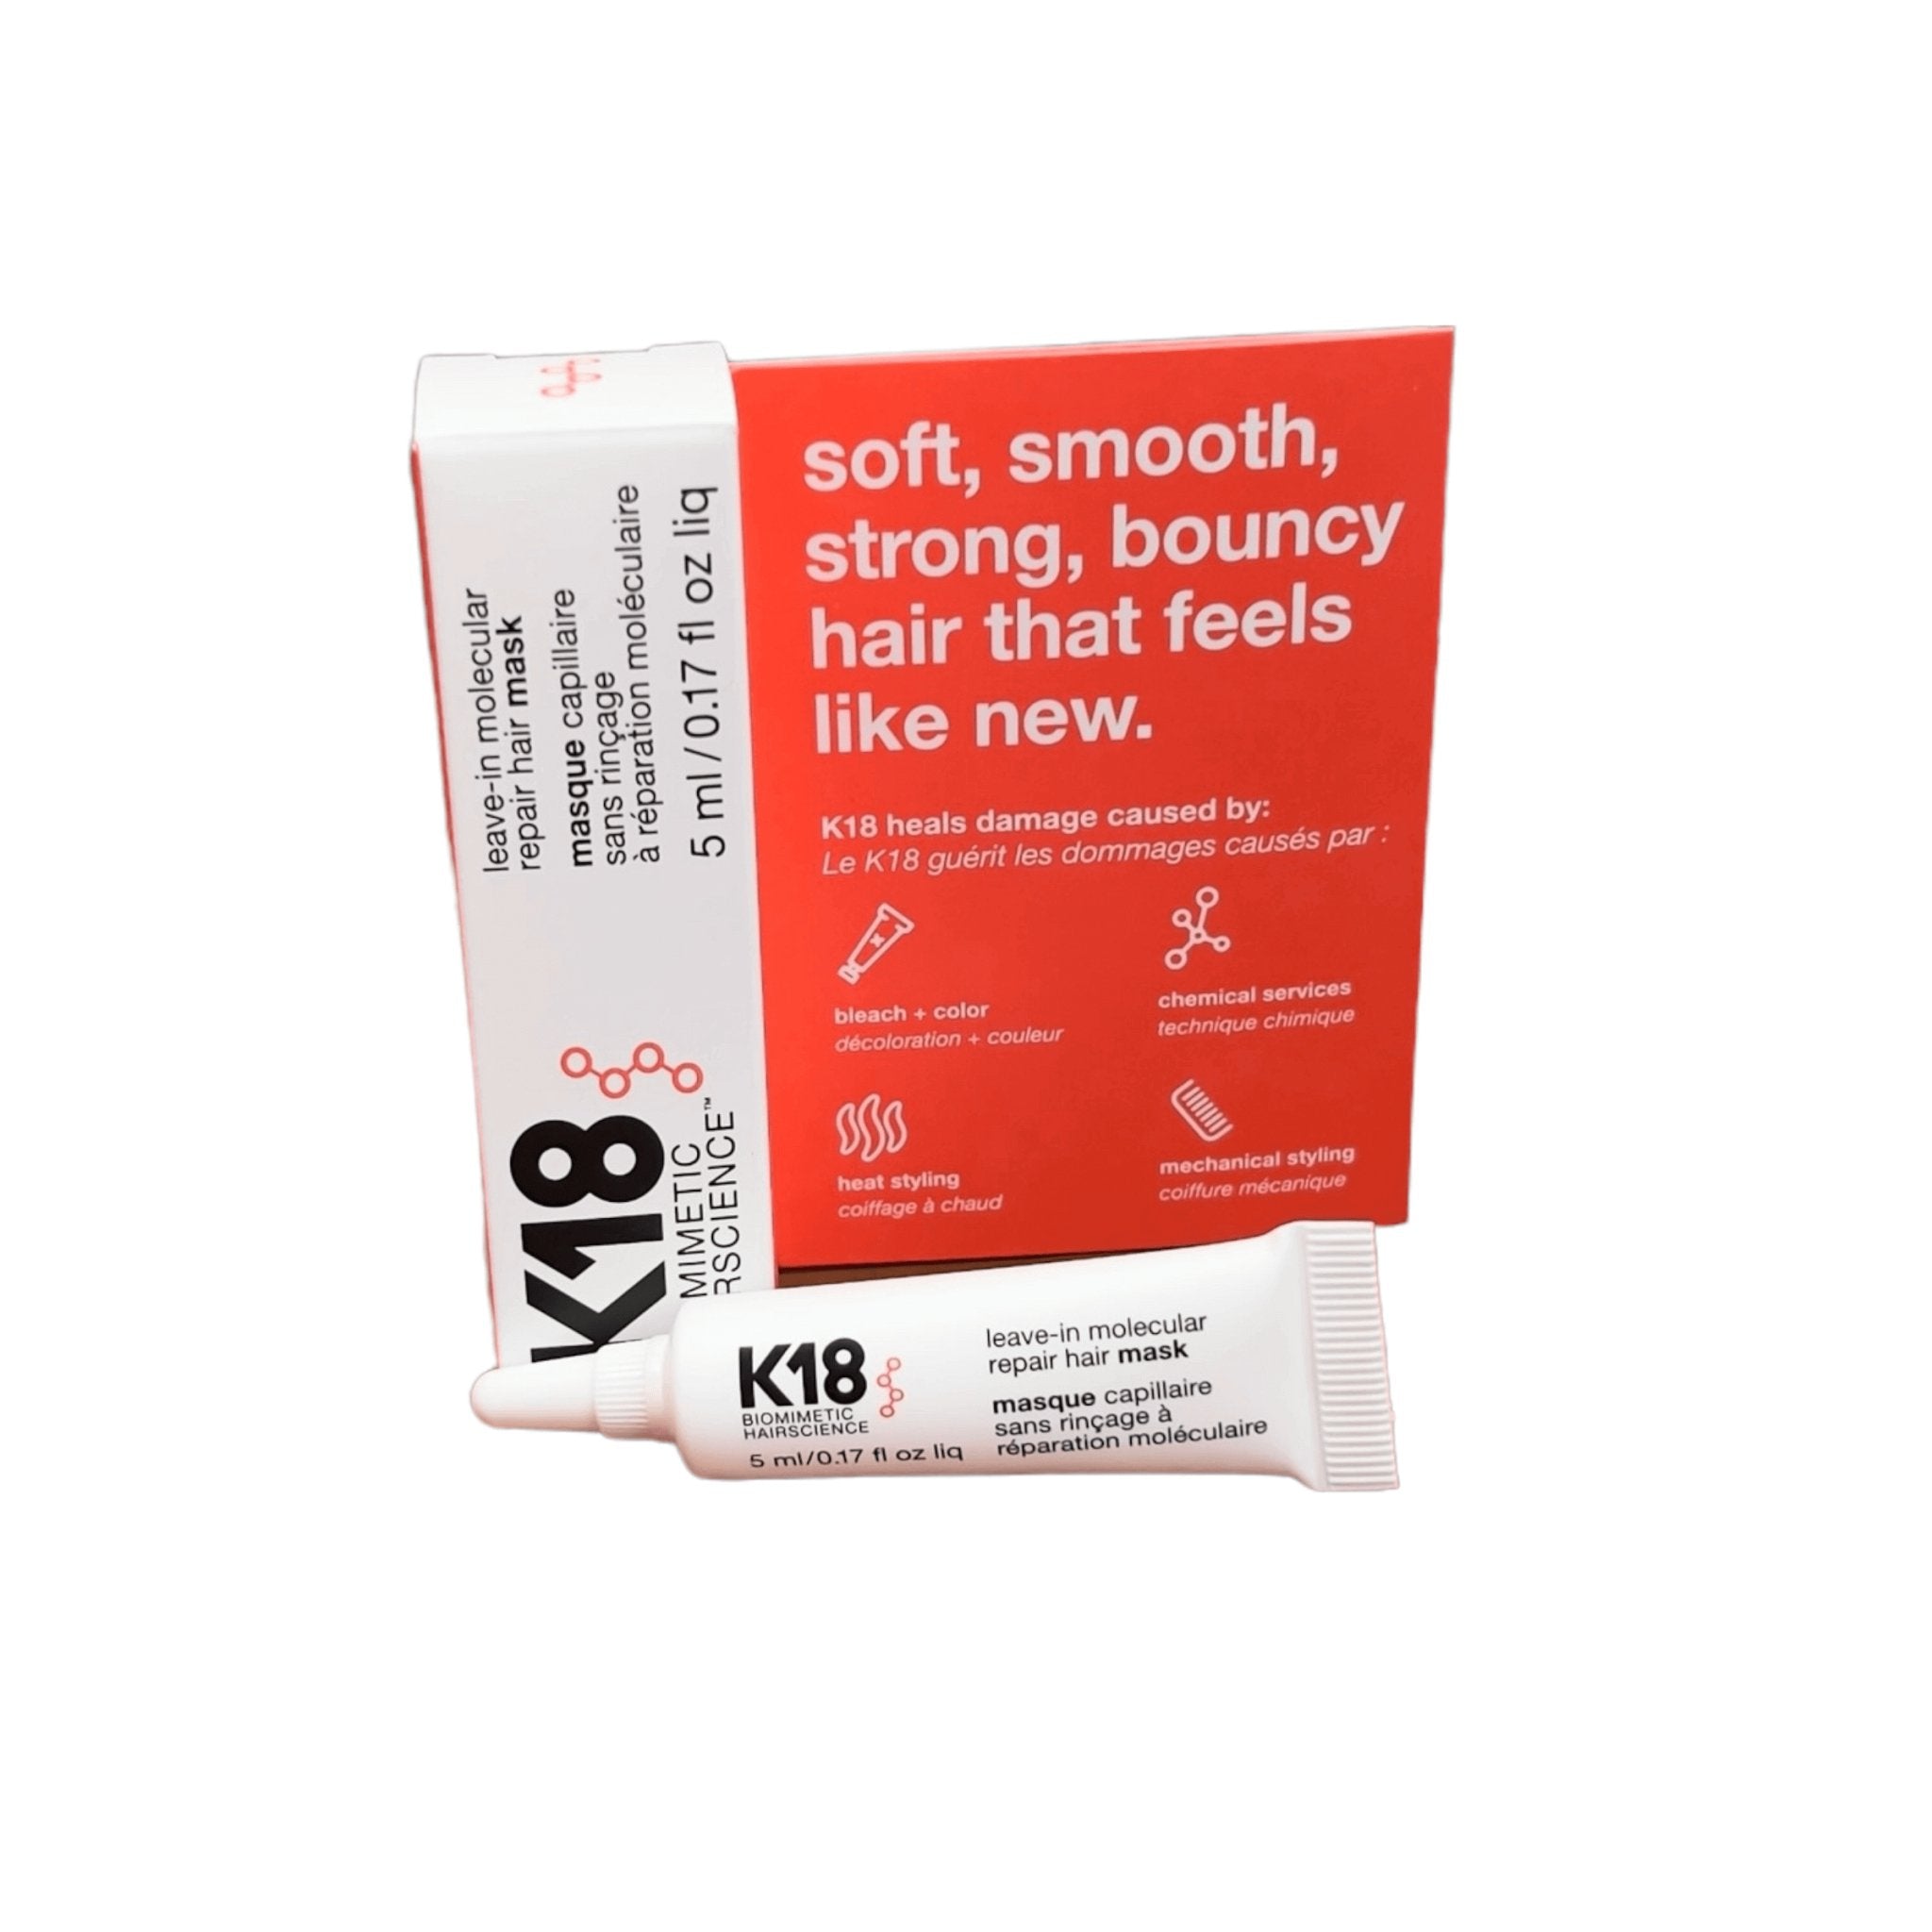 K18 Hair Repair gel is a soft and smooth hair product designed to rejuvenate damaged hair. The 10ml size makes it perfect for on-the-go use, providing bouncy results to your locks.